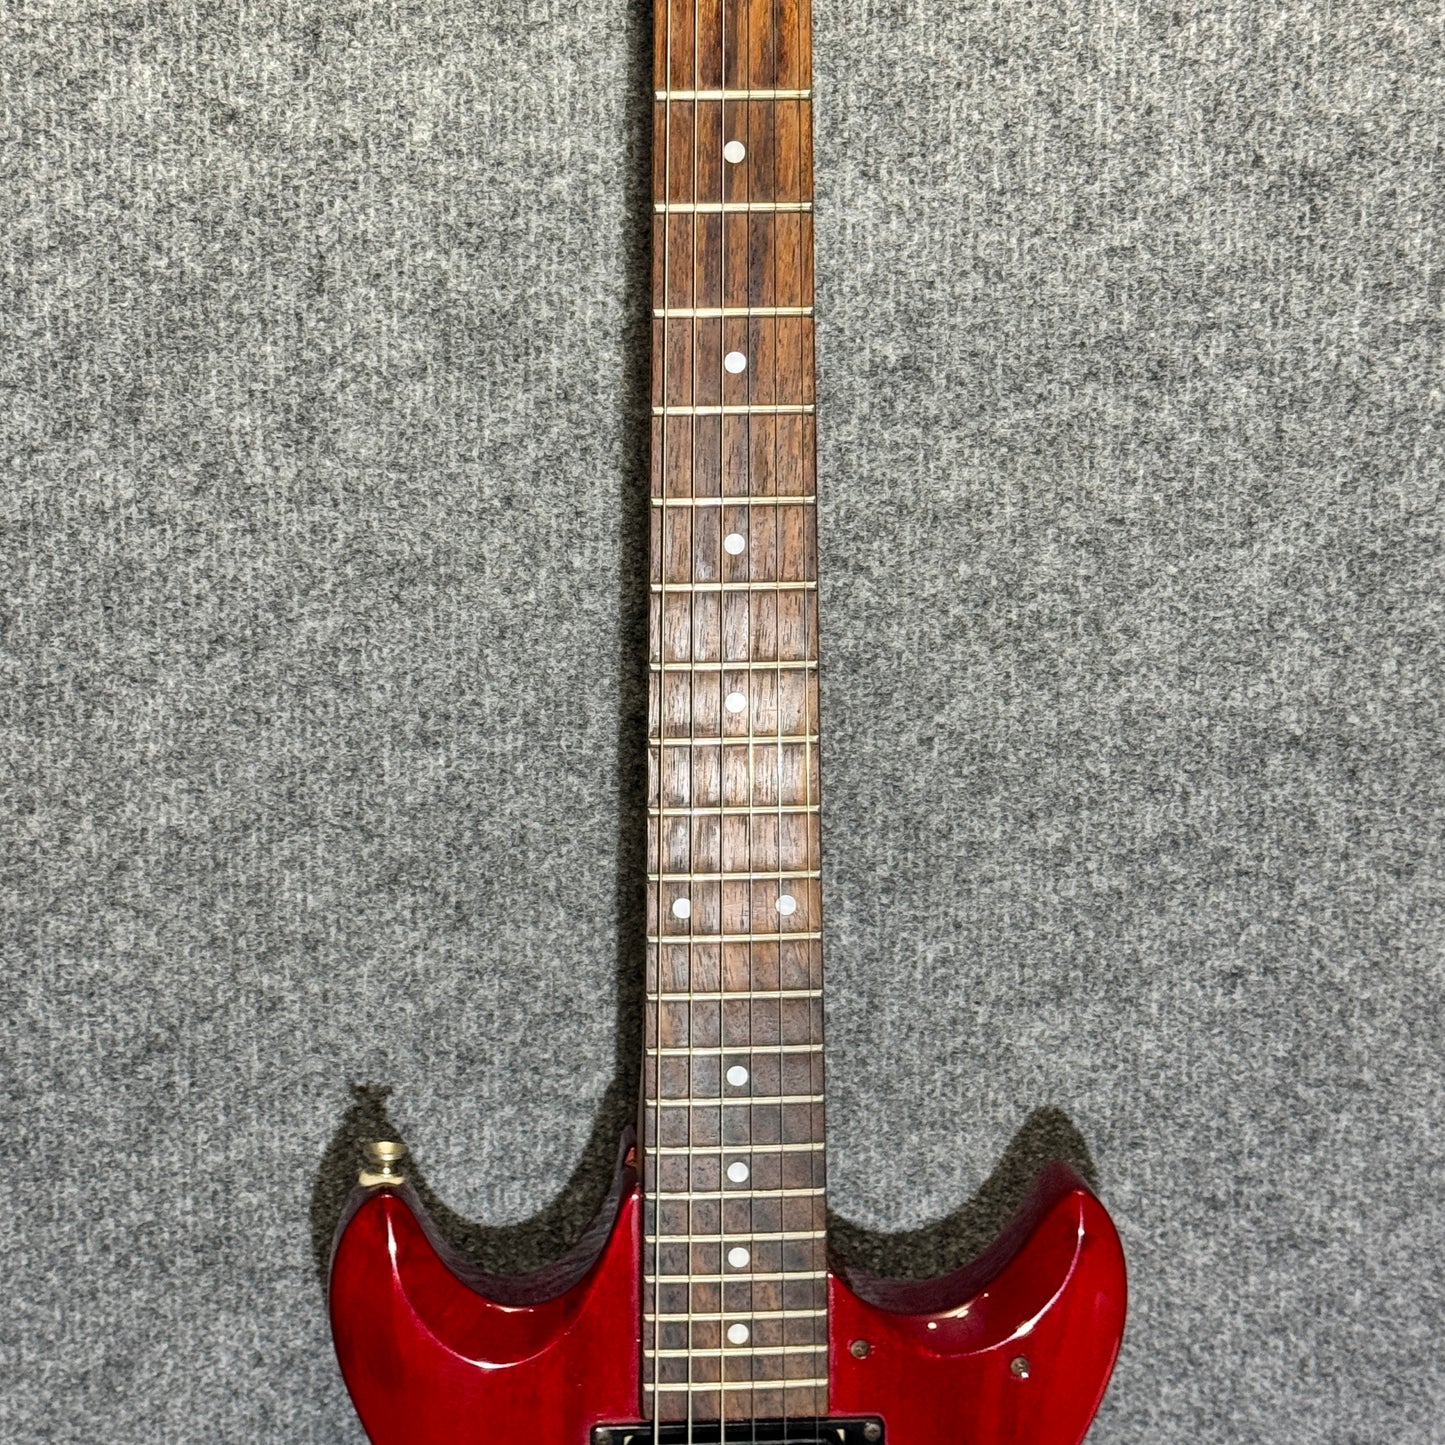 Ibanez GIO GAX30 Electric Guitar